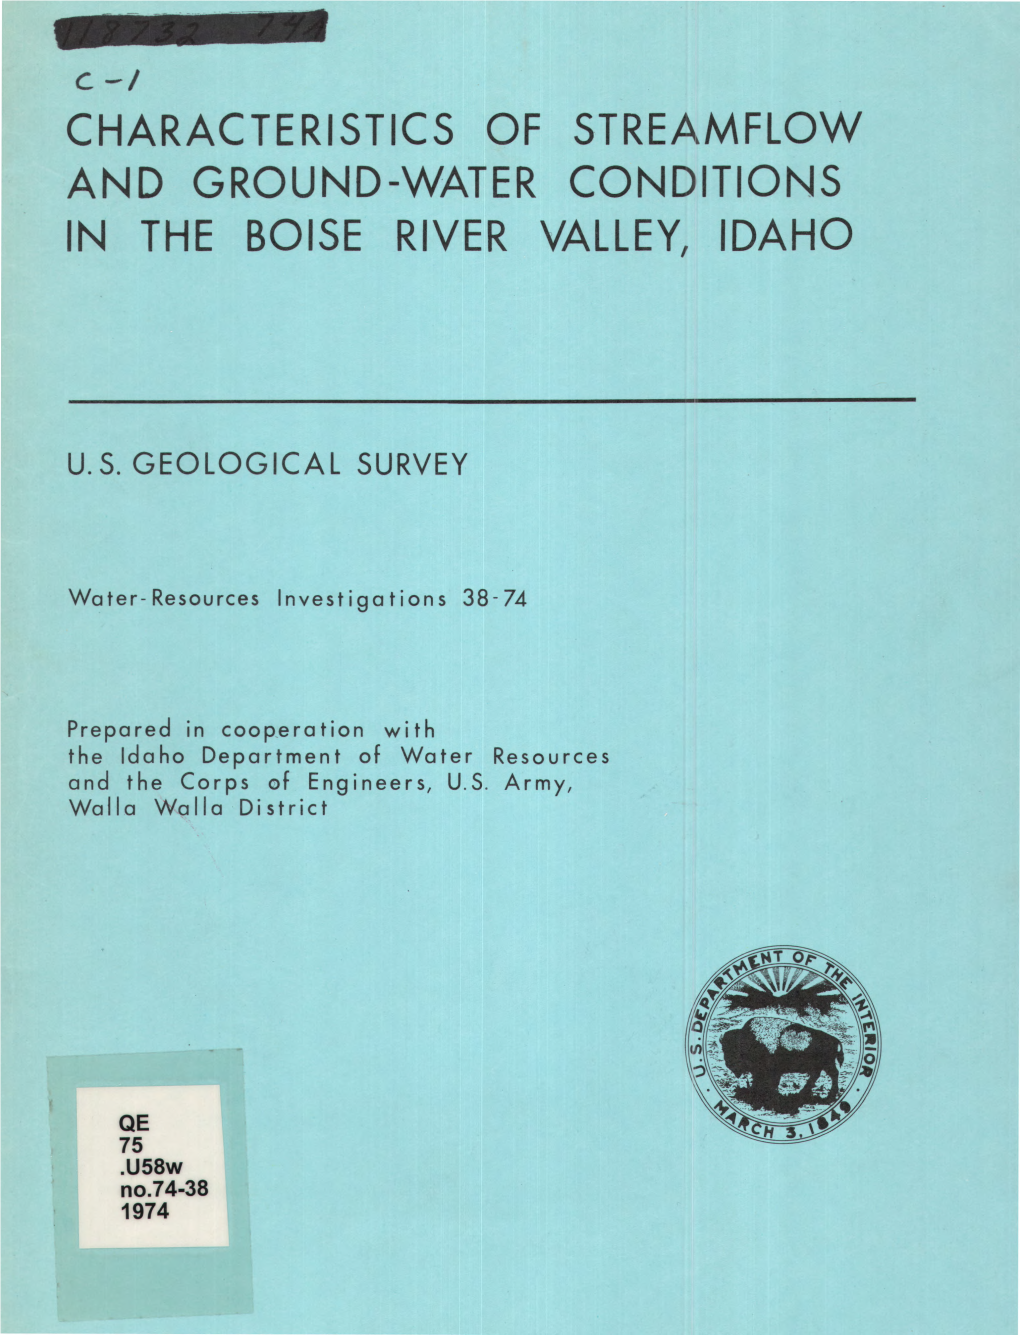 Characteristics of Streamflow and Ground-Water Conditions in the Boise River Valley, Idaho